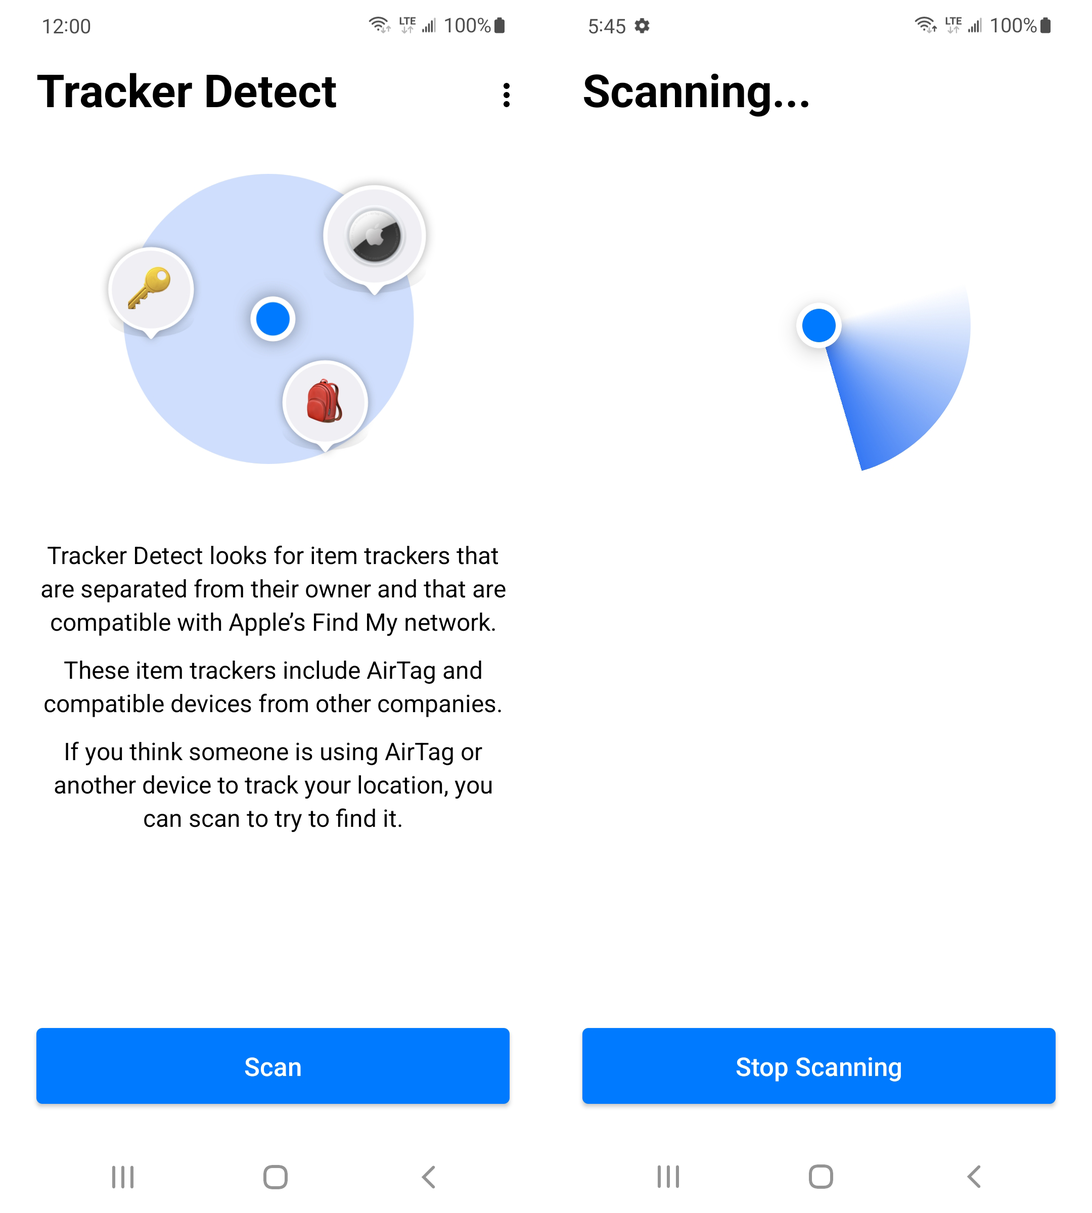 Apple's Tracker Detect app for Android lets you scan for nearby AirTags.